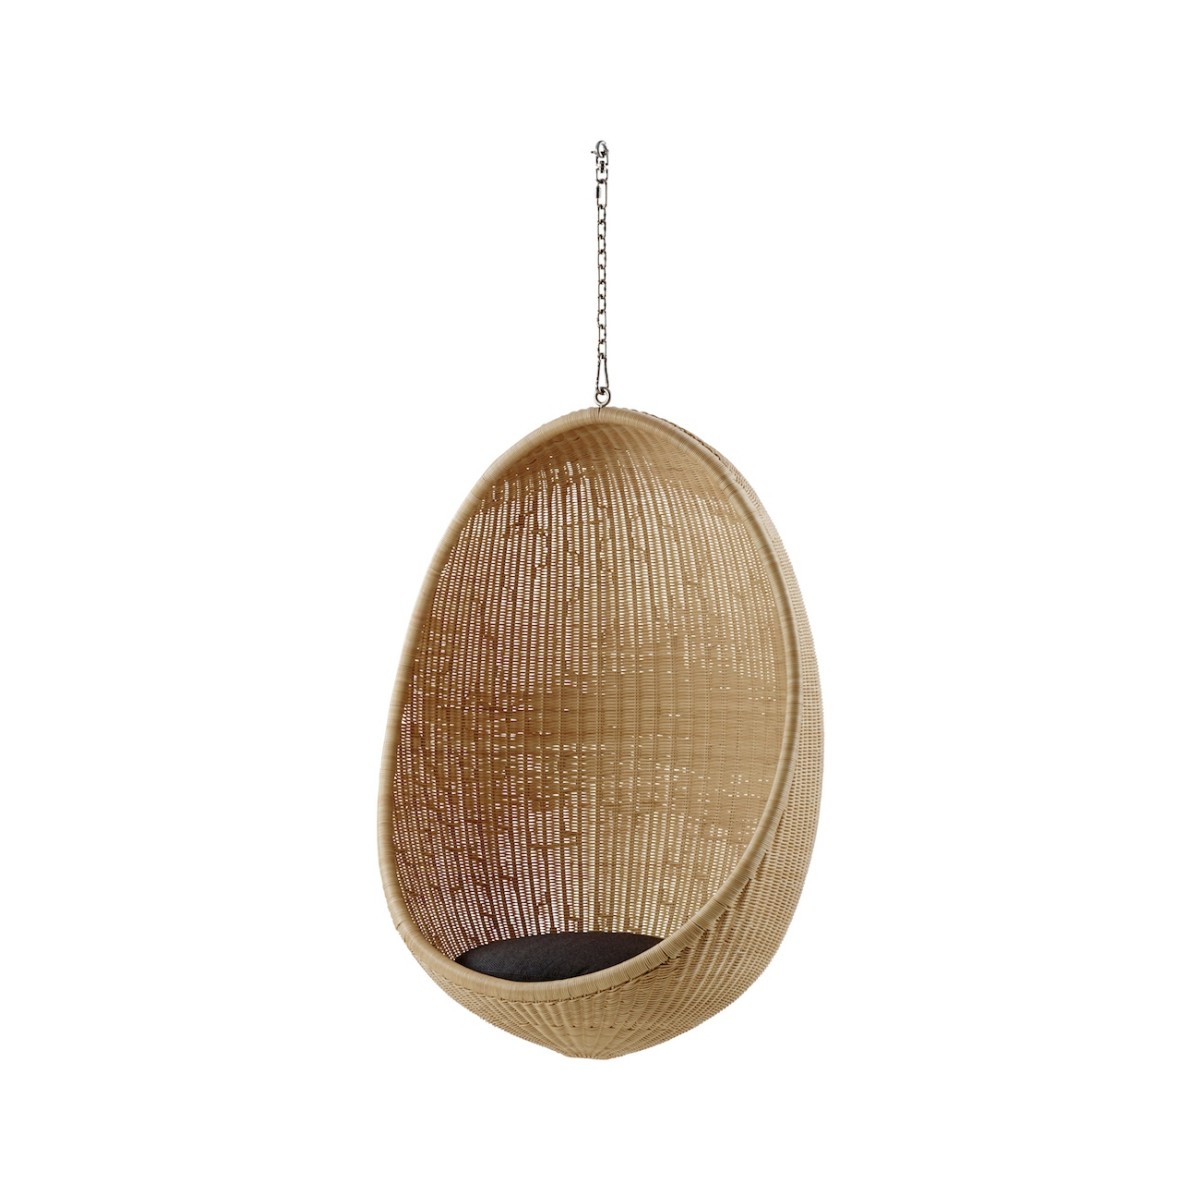 150 cm chain for hanging Egg chair